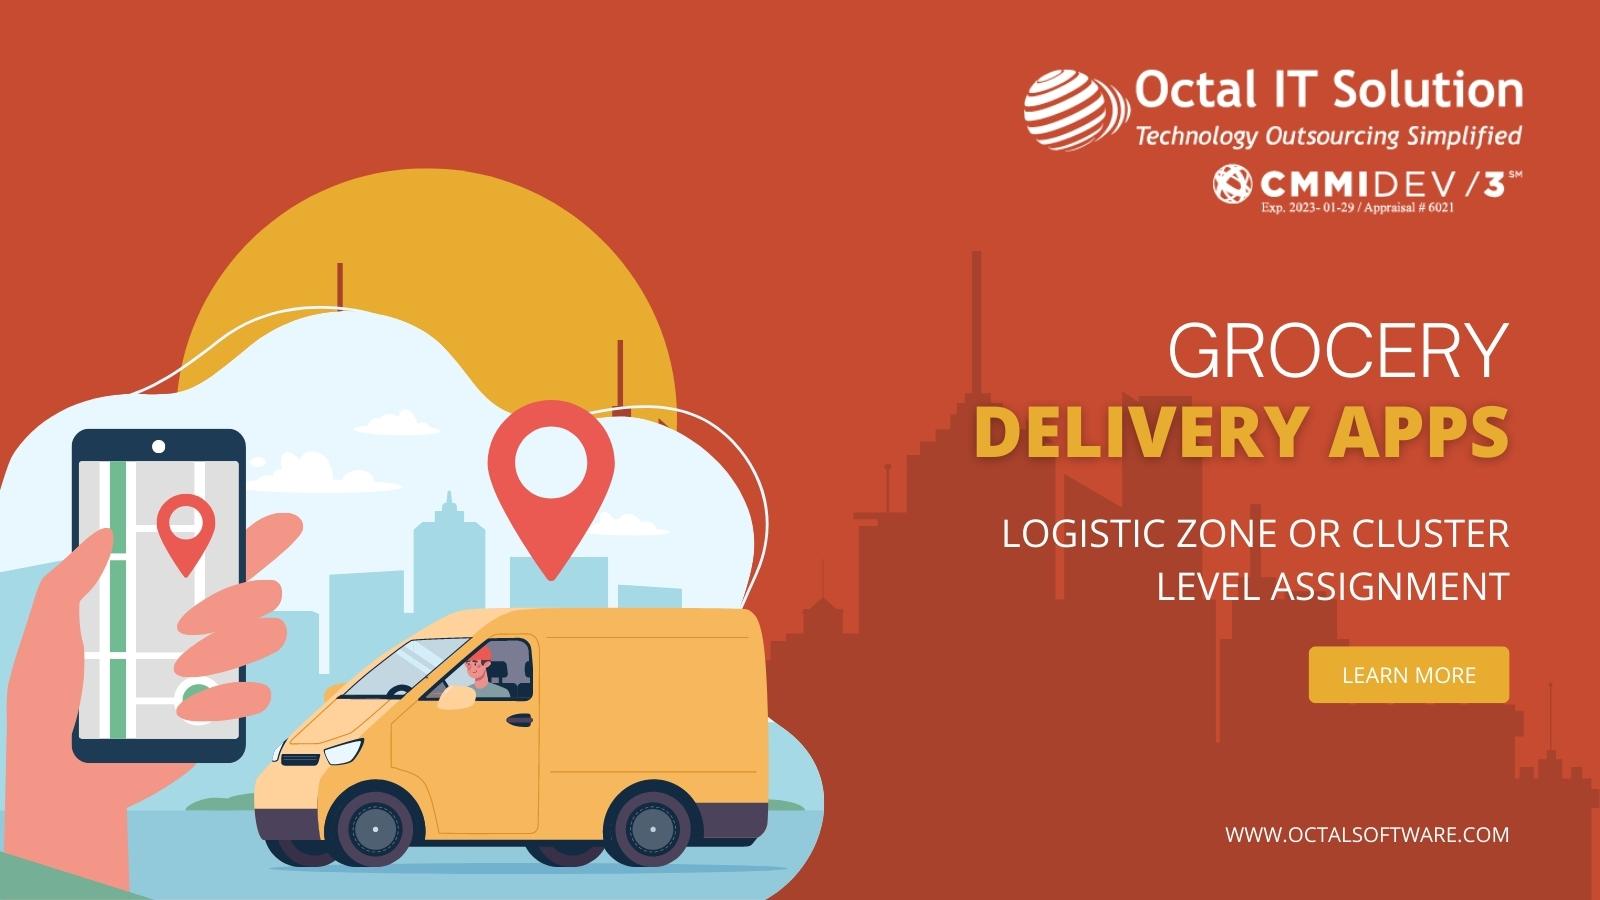 How Delivery Logistics Zone / Cluster Level Assignment Works?